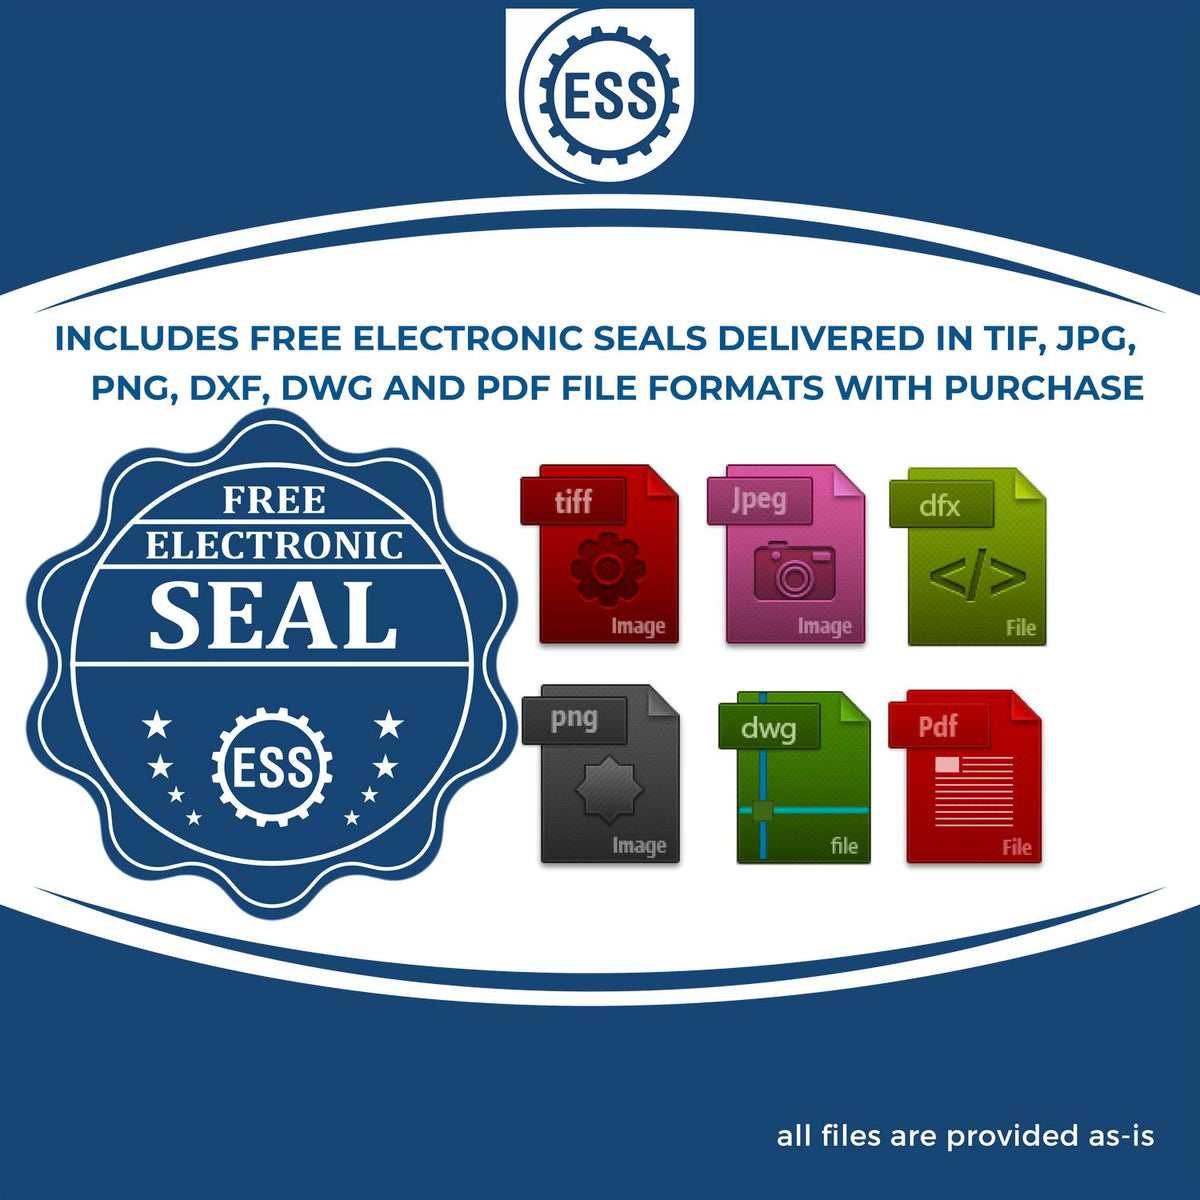 An infographic for the free electronic seal for the Slim Pre-Inked South Carolina Professional Geologist Seal Stamp illustrating the different file type icons such as DXF, DWG, TIF, JPG and PNG.